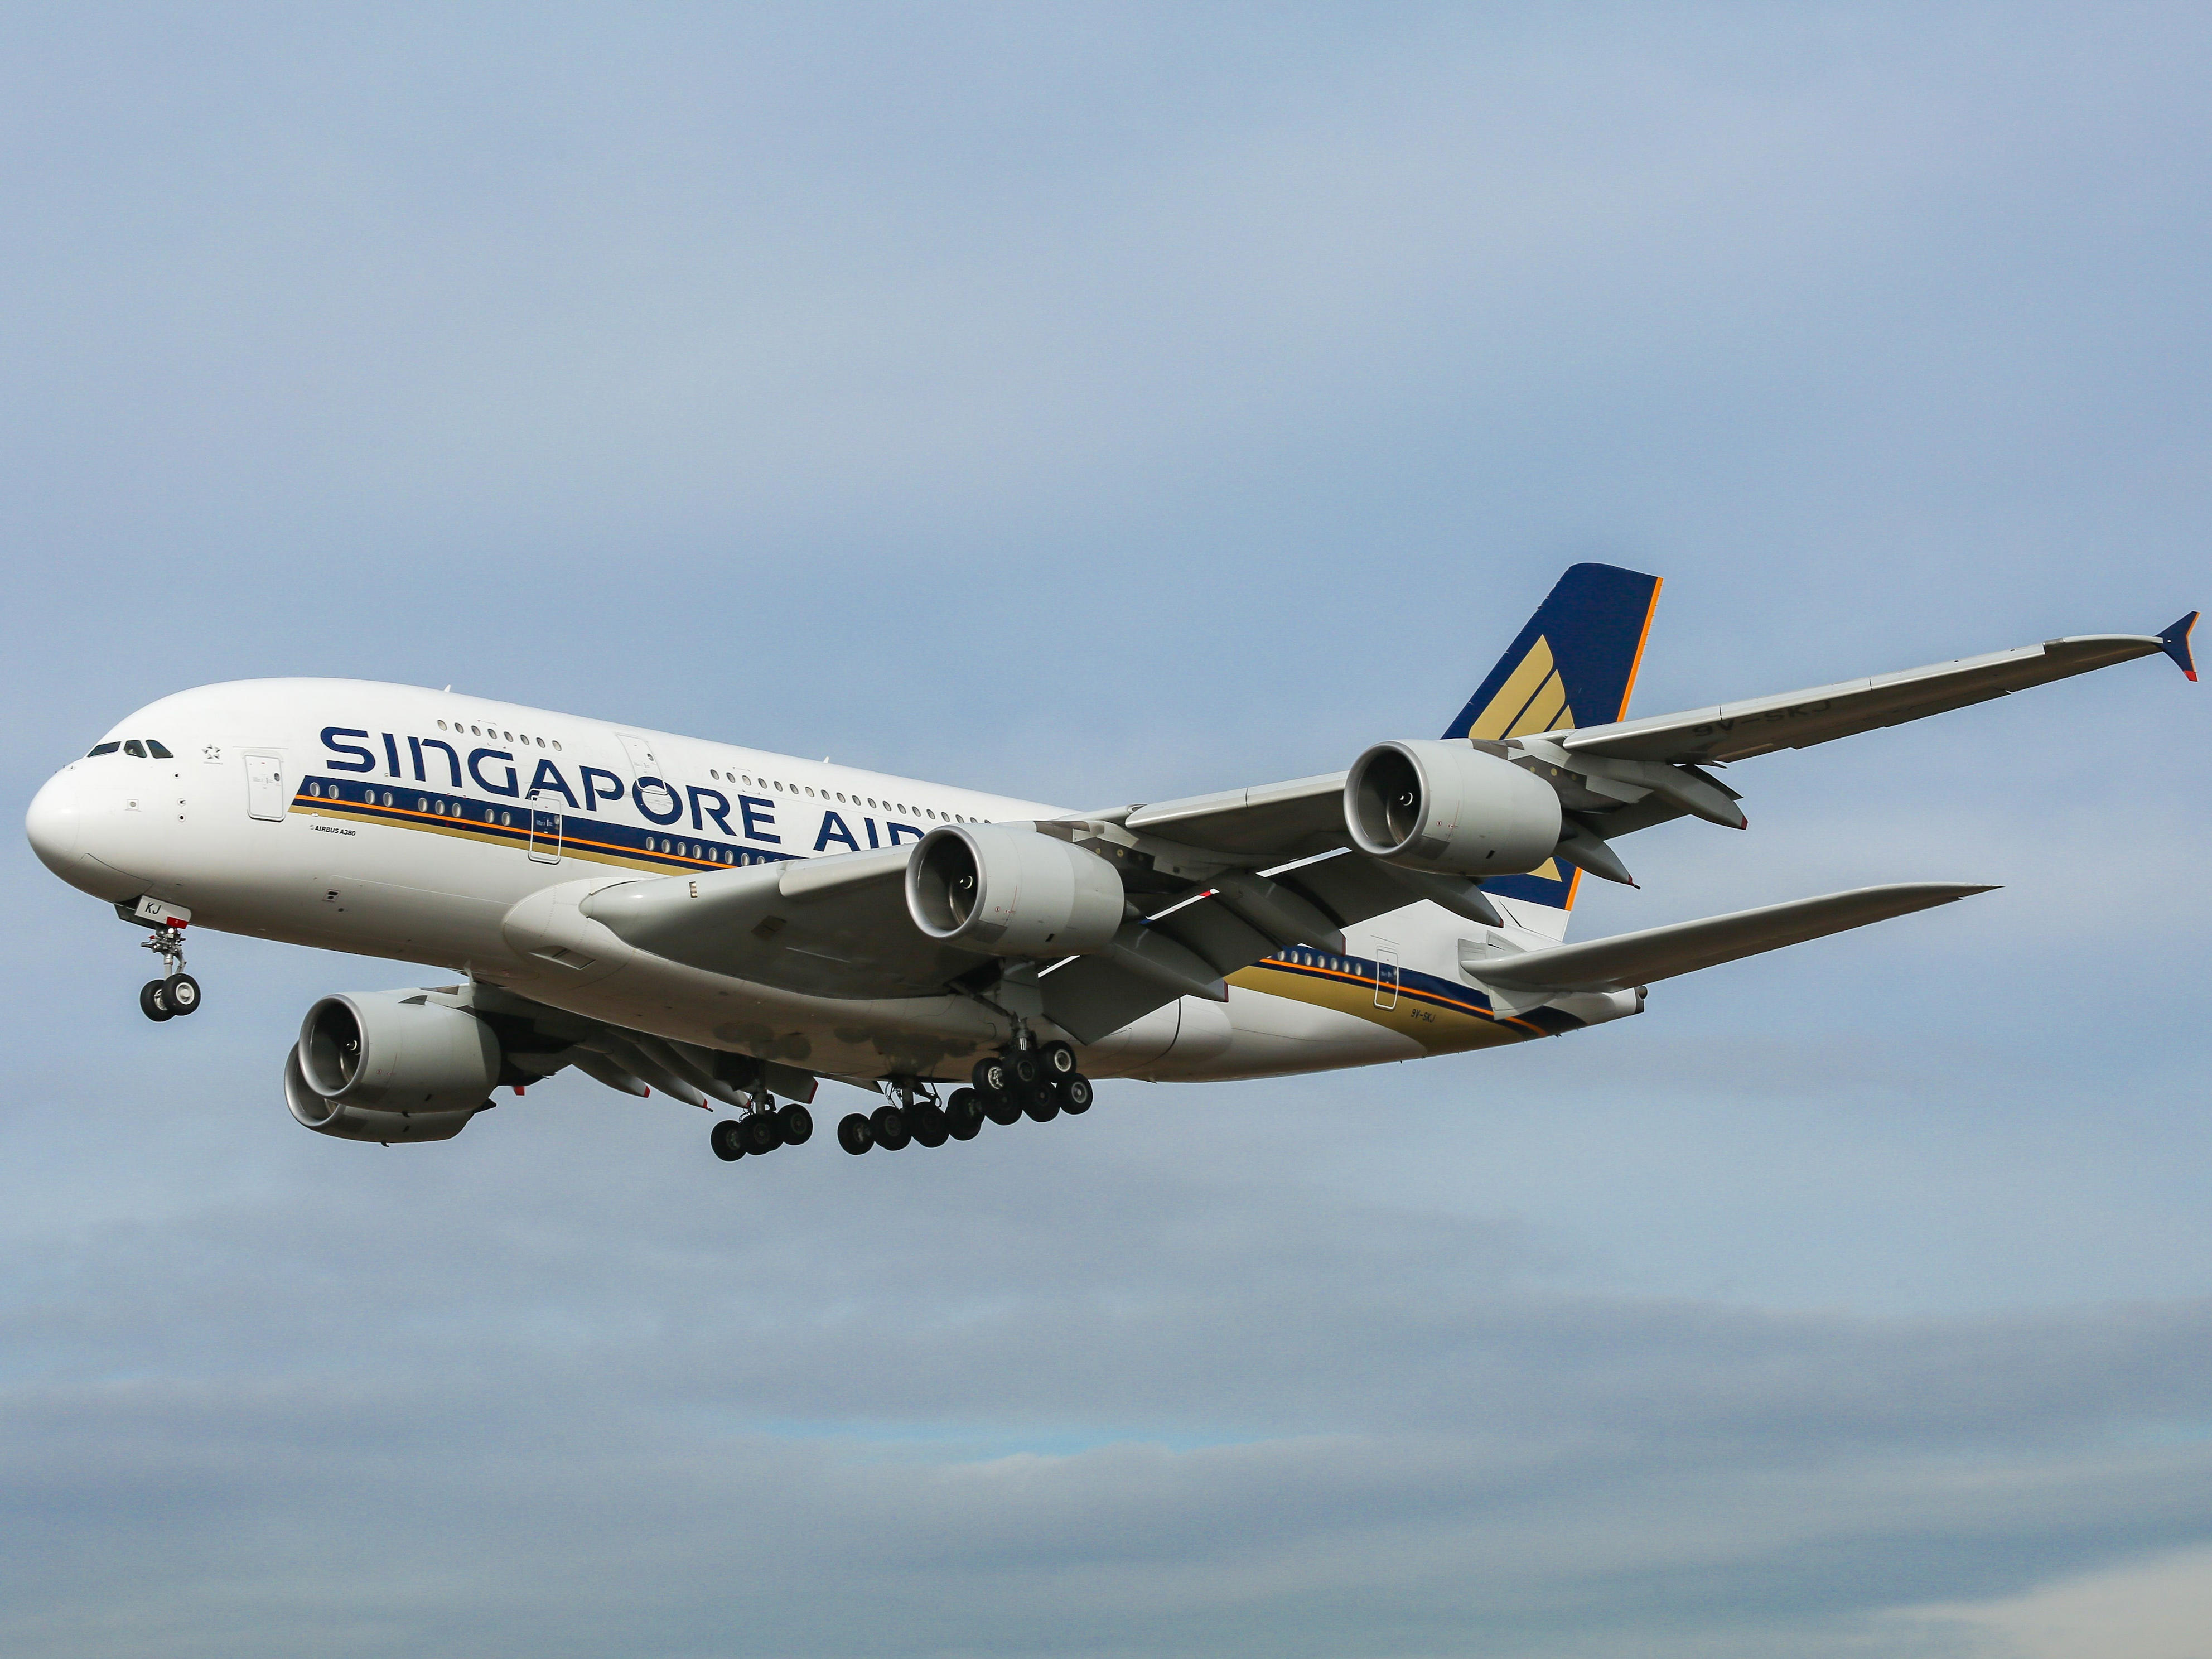 <p>Cirium data shows Singapore flies its A380s on select routes between Changi and Asia, Europe, and Australia.</p><p>These include flying to Mumbai, Delhi, Frankfurt, London, Shanghai, and Sydney. The US fell off the list last year.</p>